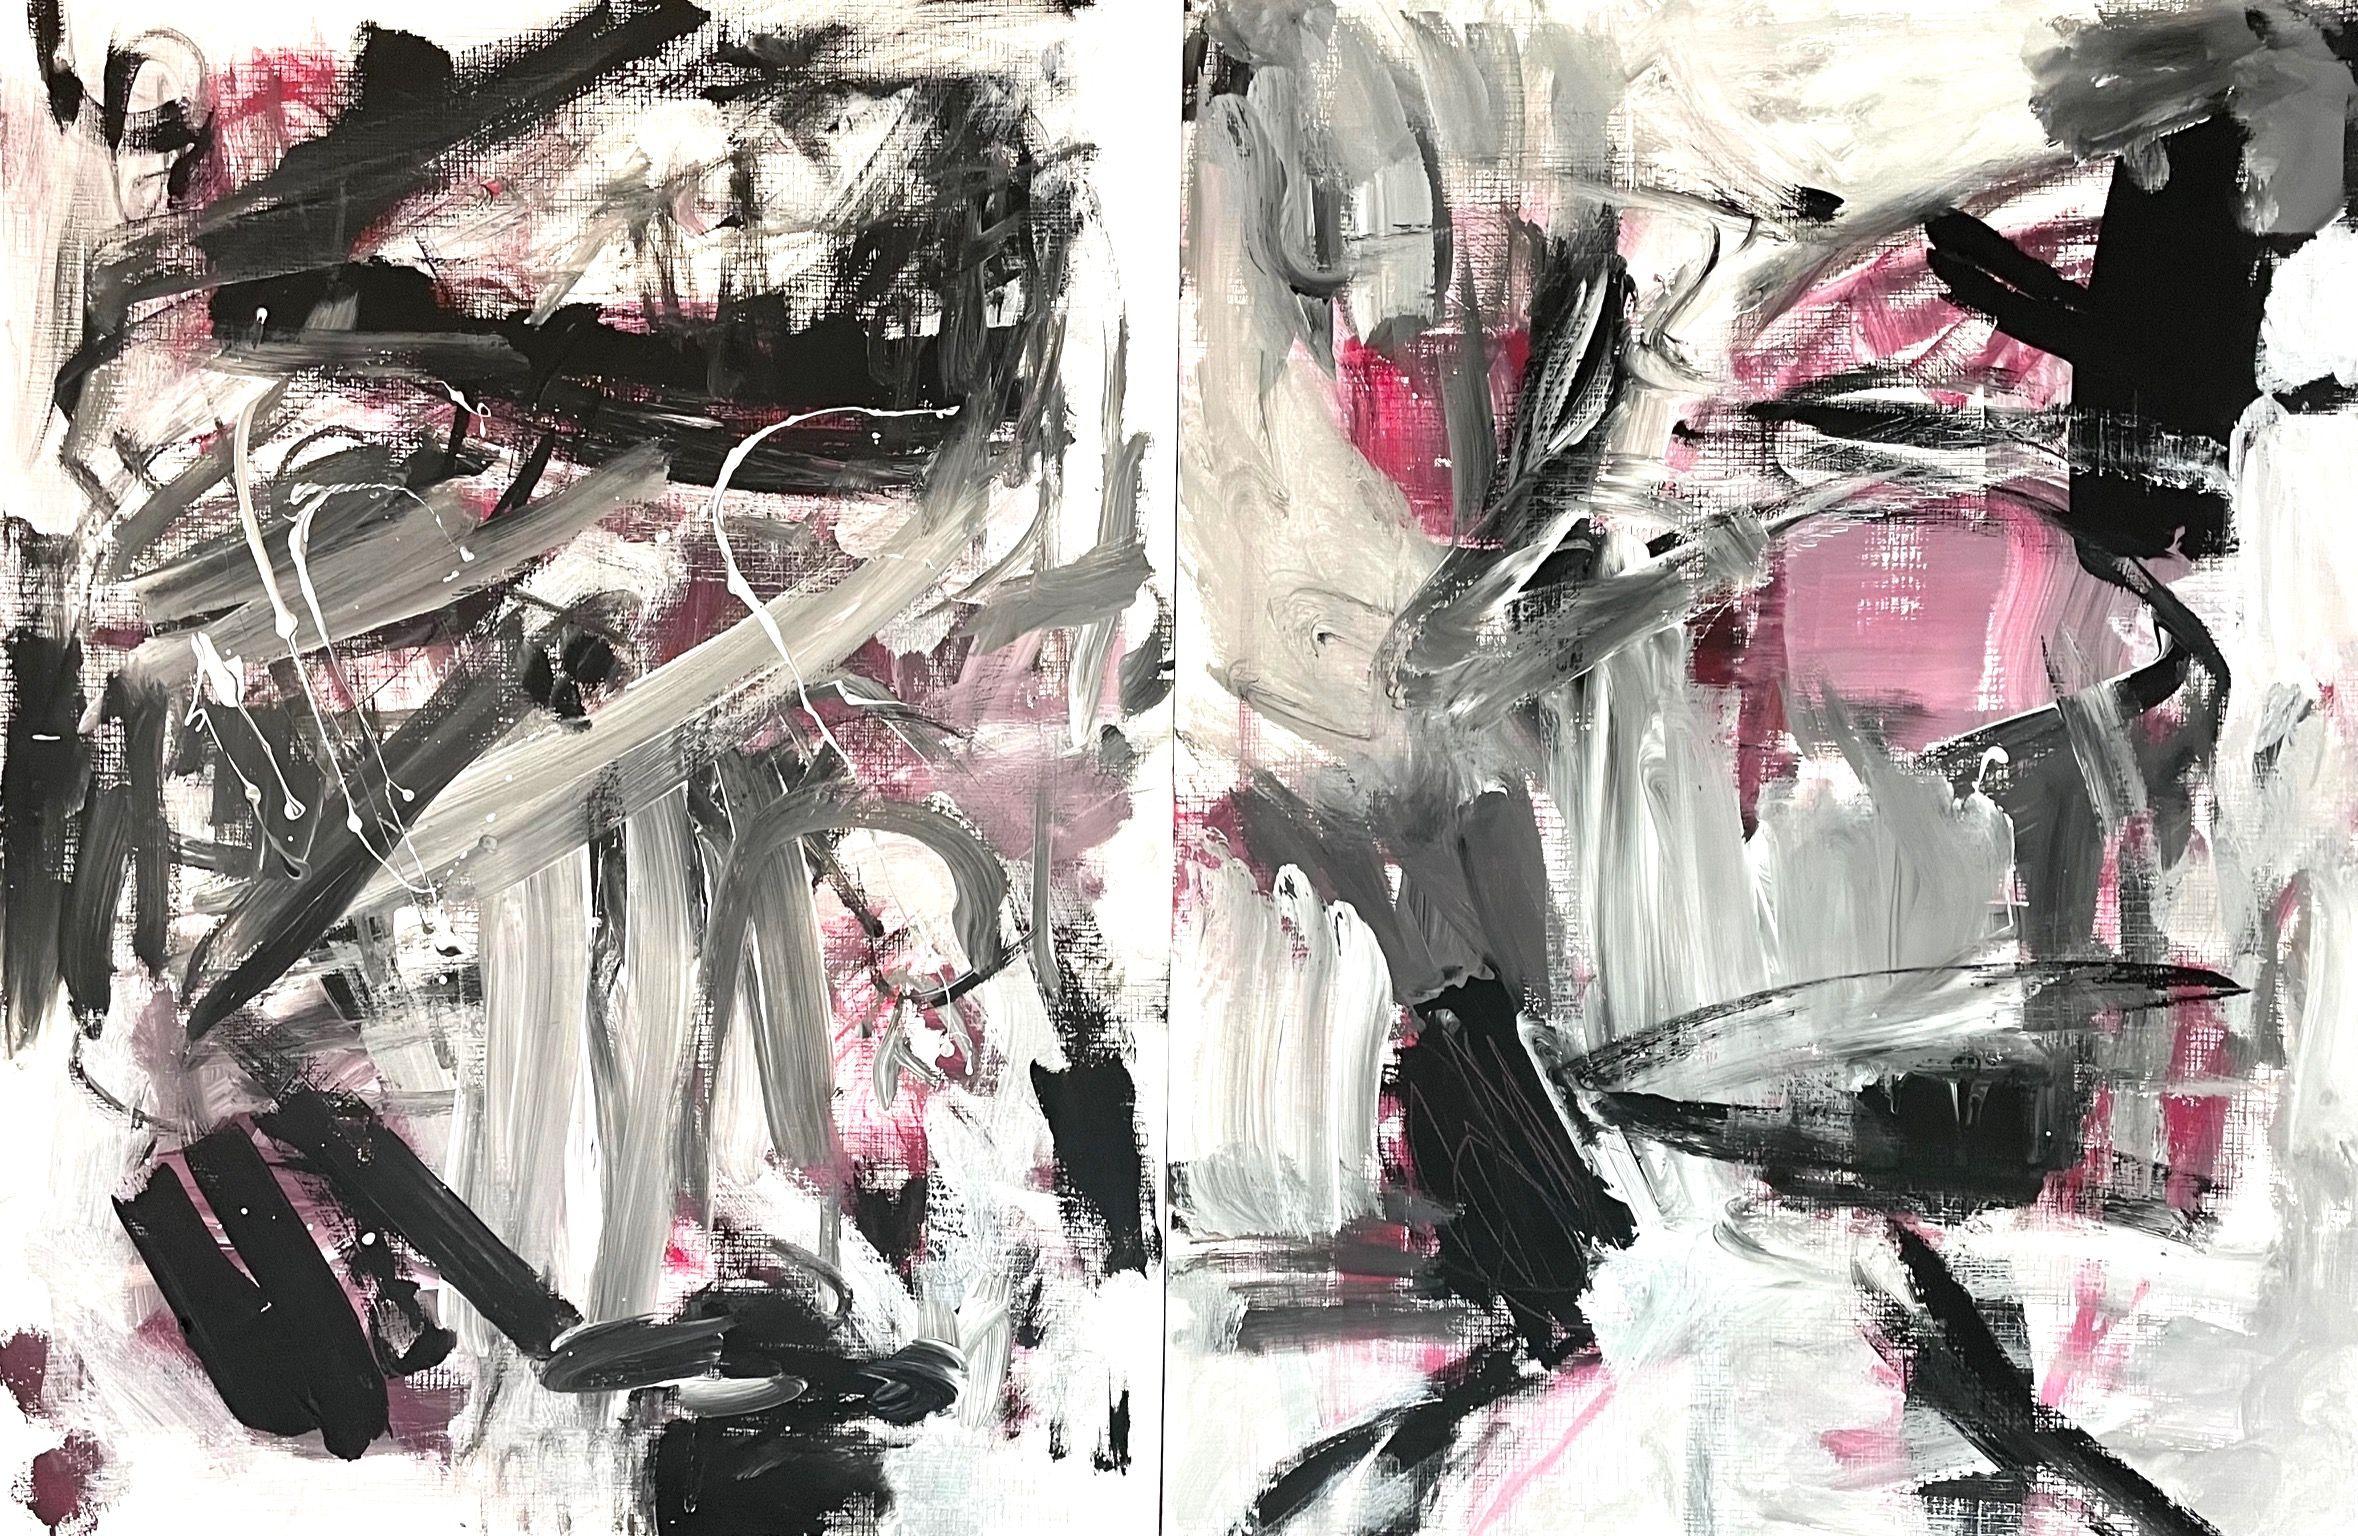 "Embracing (Diptych)" is an abstract and expressive diptych on paper. It is painted gesturally and dynamically and is part of modern expressionism. The artist deliberately limited herself to the three colors black, white and red. The result was a